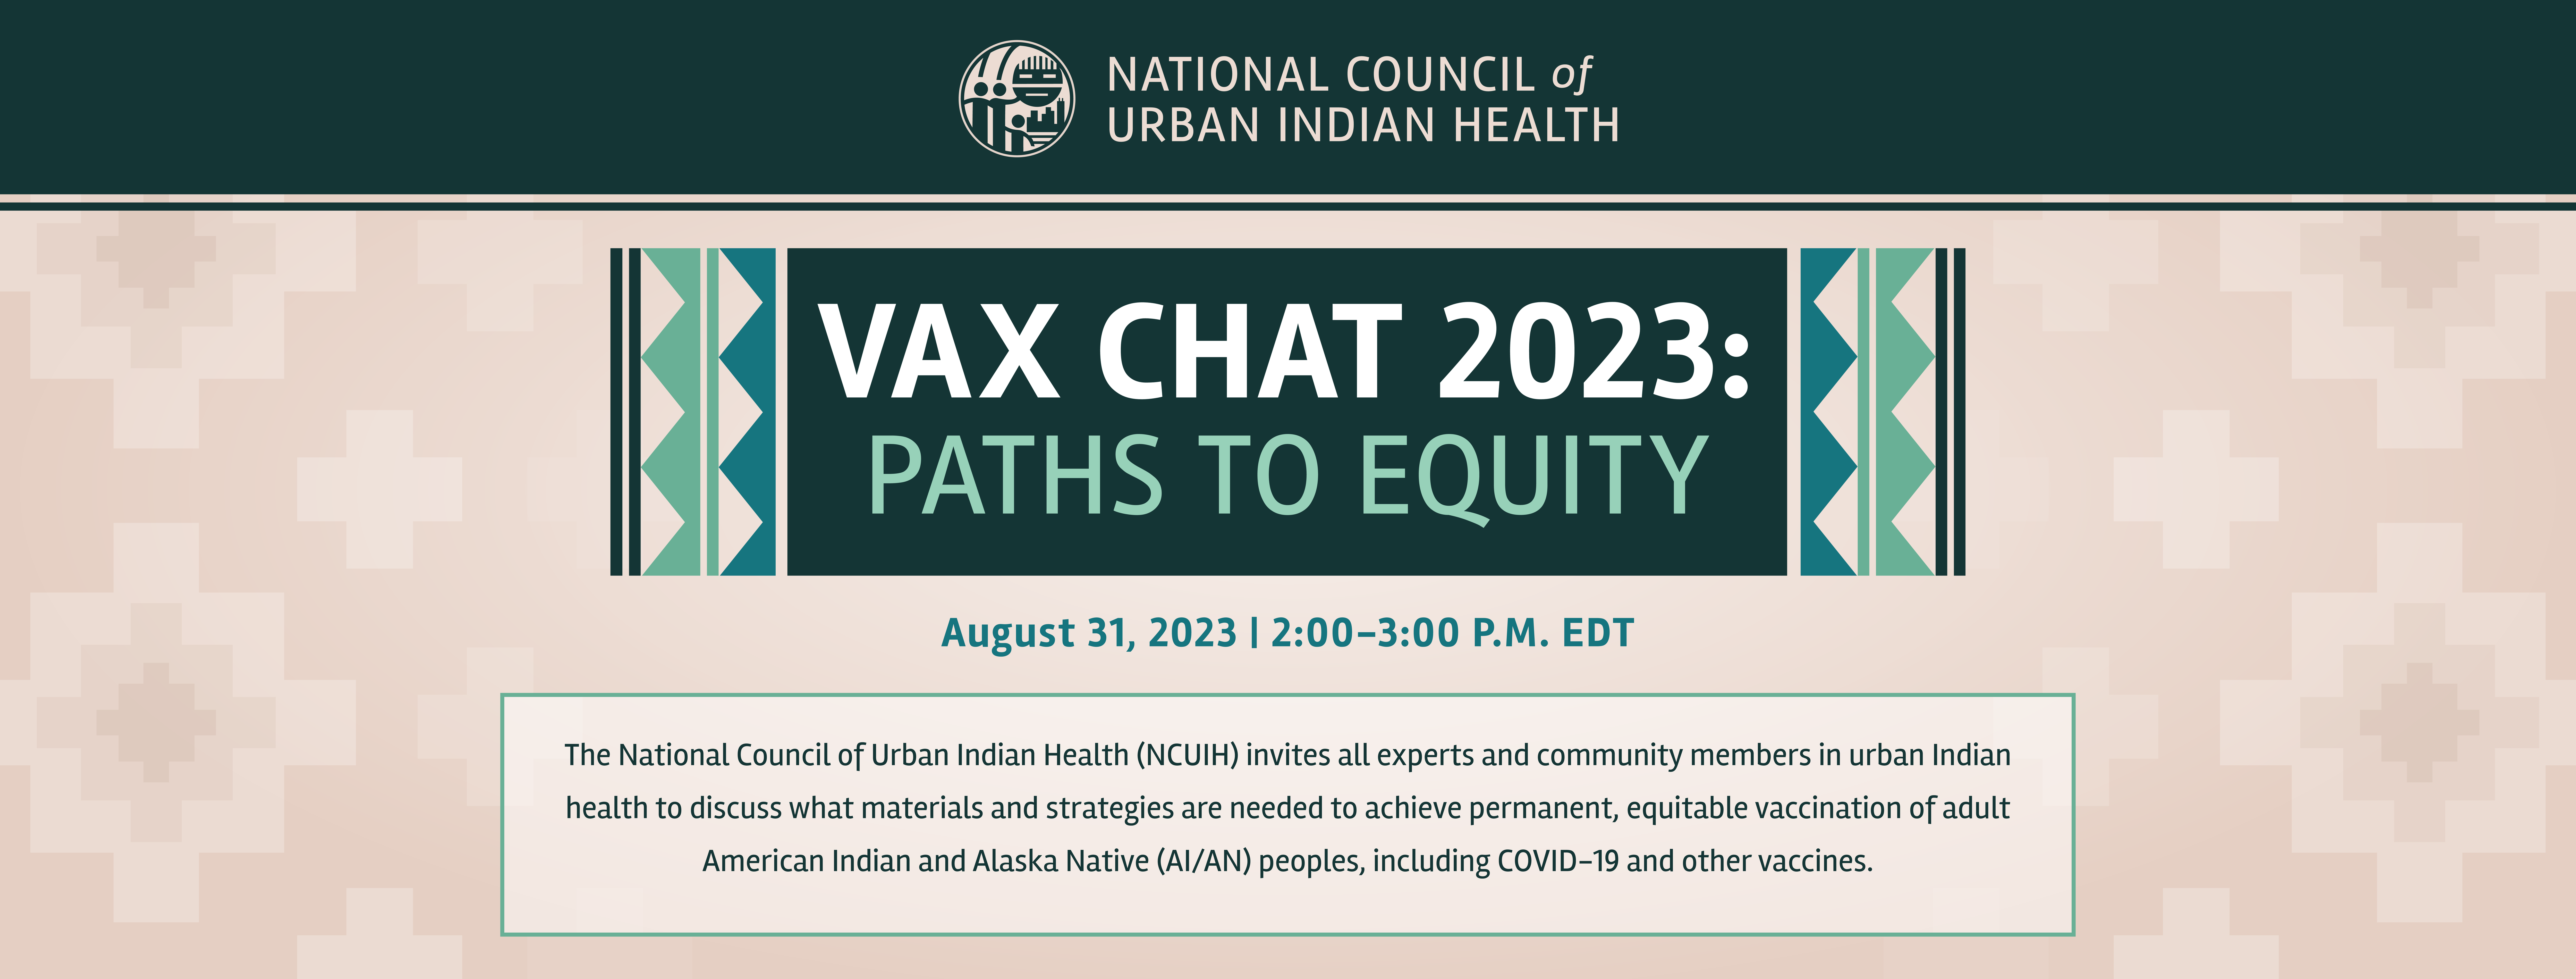 Vax Chat 2023: Paths to Equity